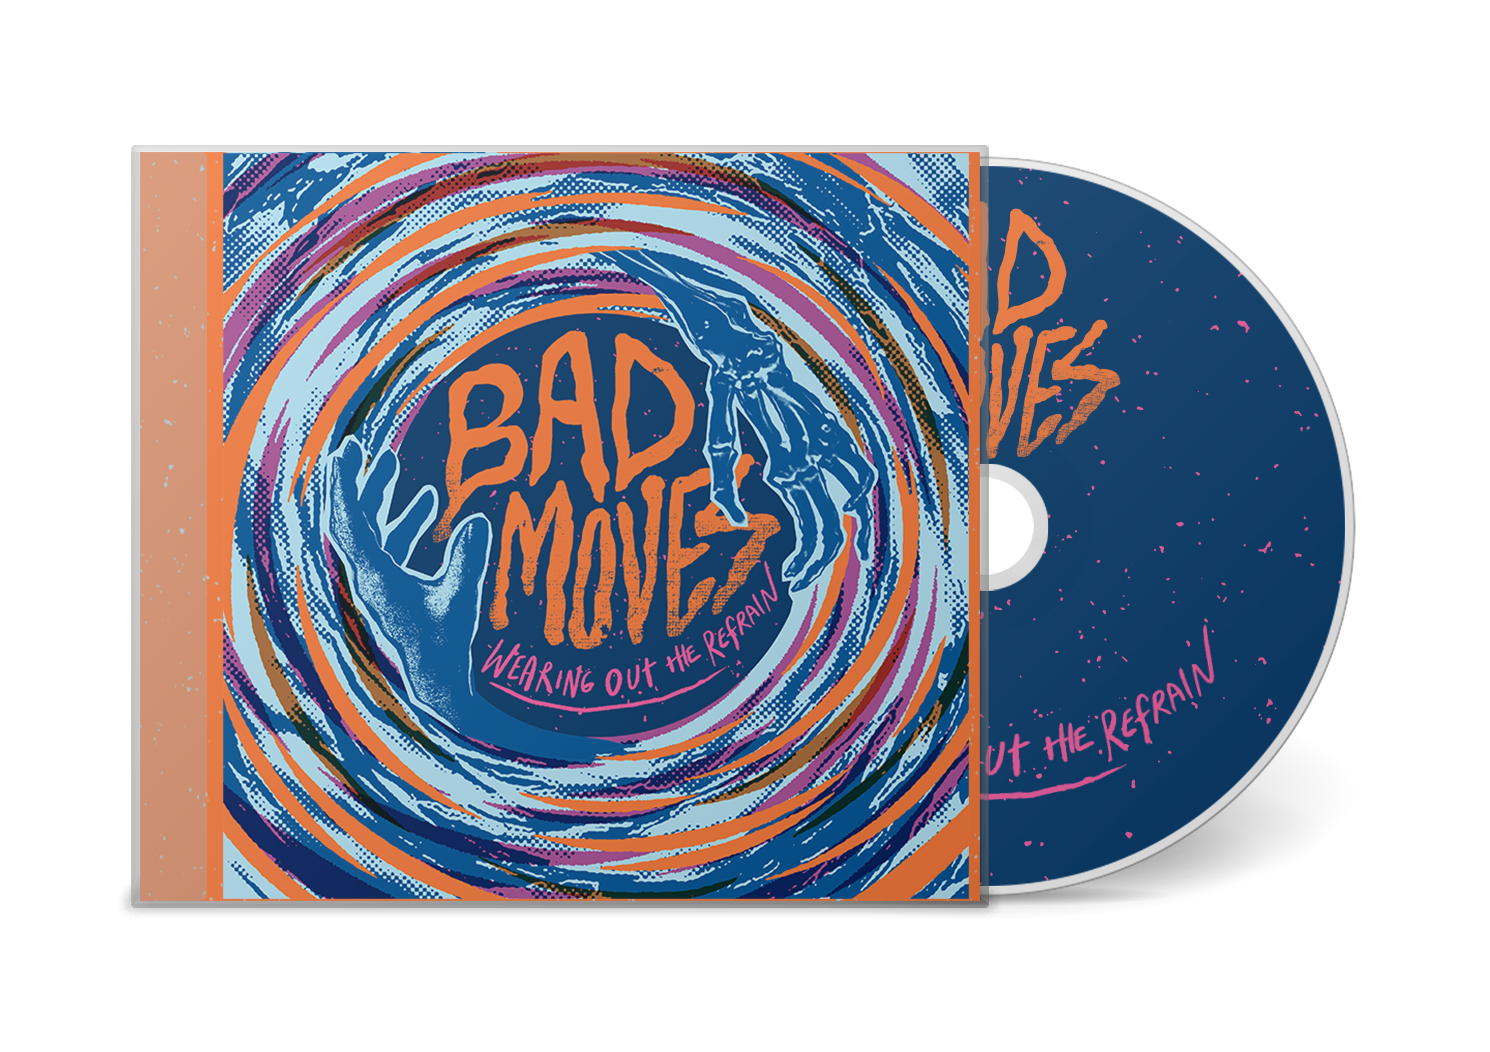 Bad Moves "Wearing Out The Refrain" CD